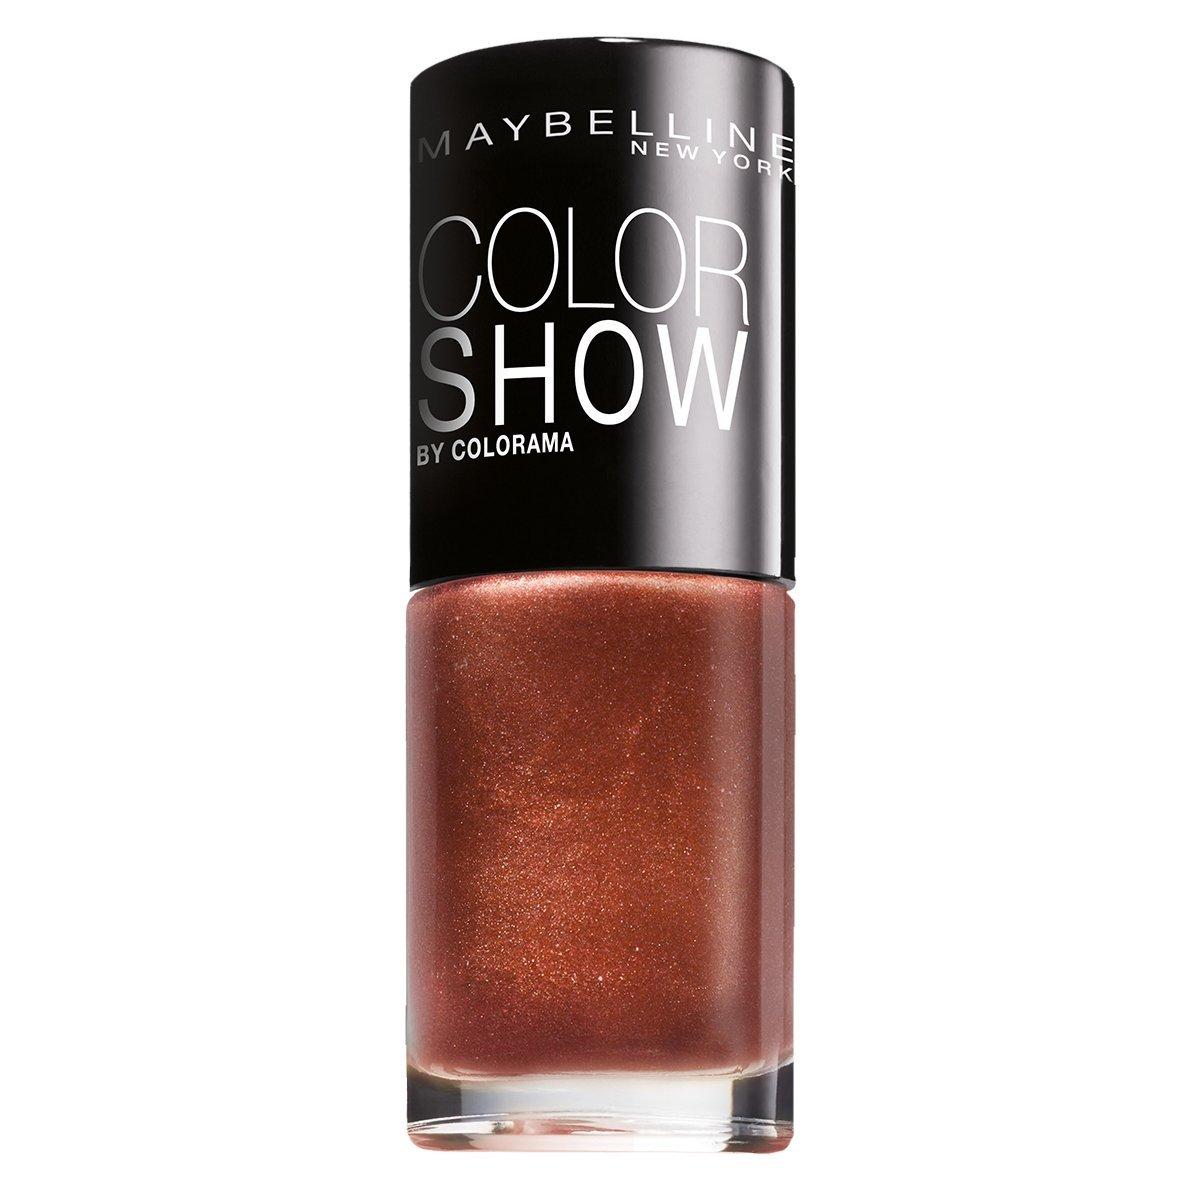 Maybelline COLOR SHOW NAIL LACQUER Magenta Mirage | Beautylish